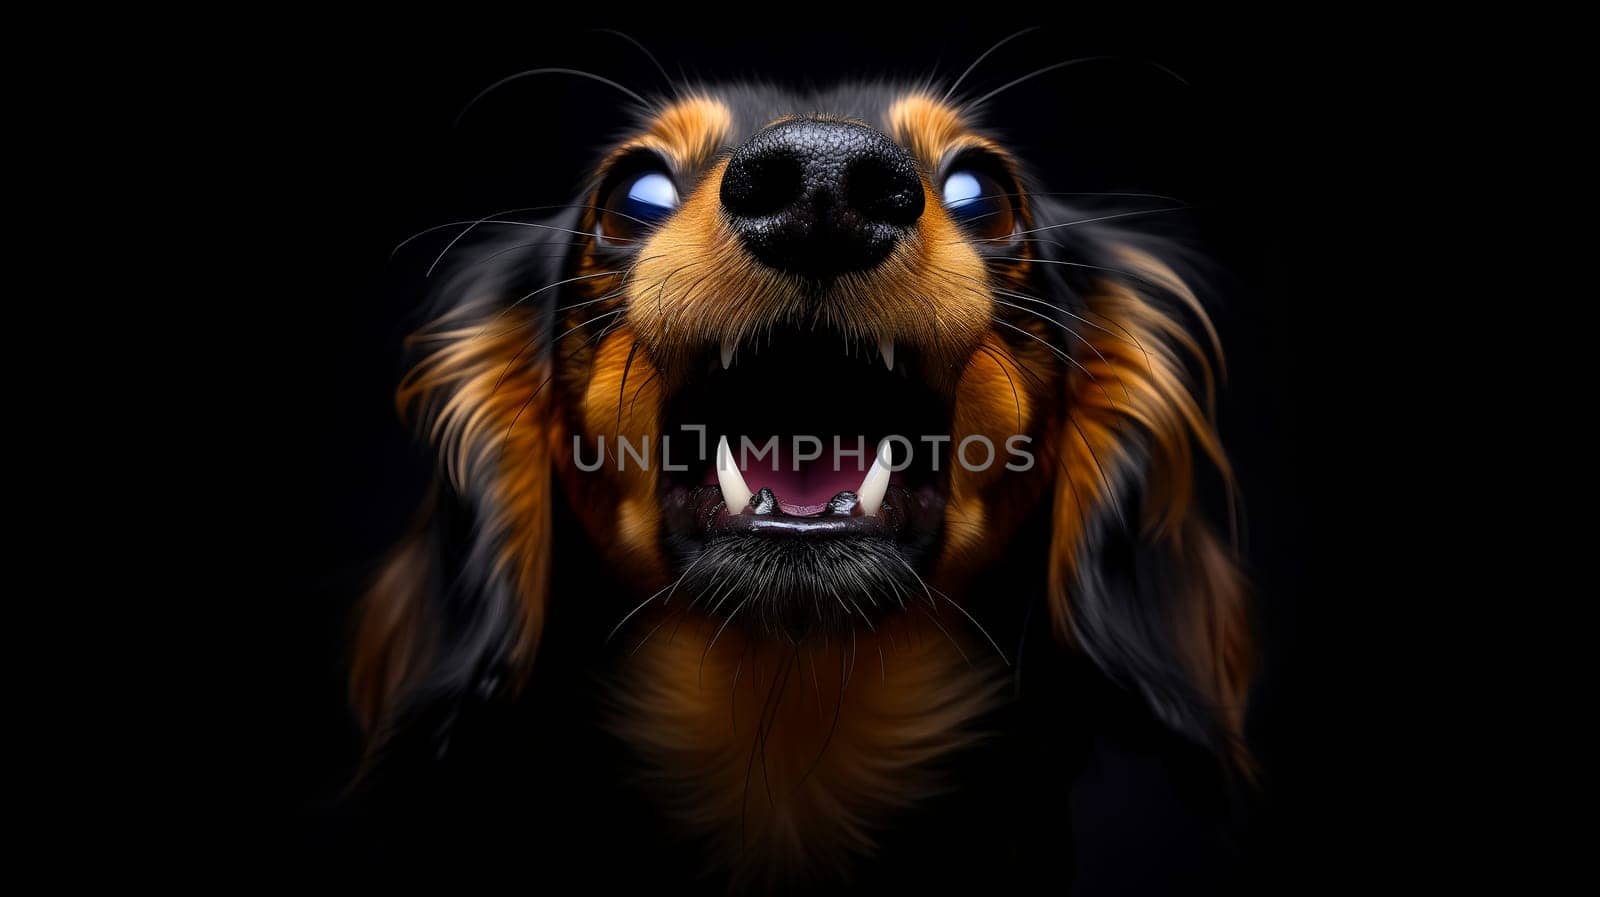 A close-up image of a Cavalier King Charles Spaniel dog with a vivid expression, showcasing its glowing eyes and open mouth, set against a dark, black backdrop.